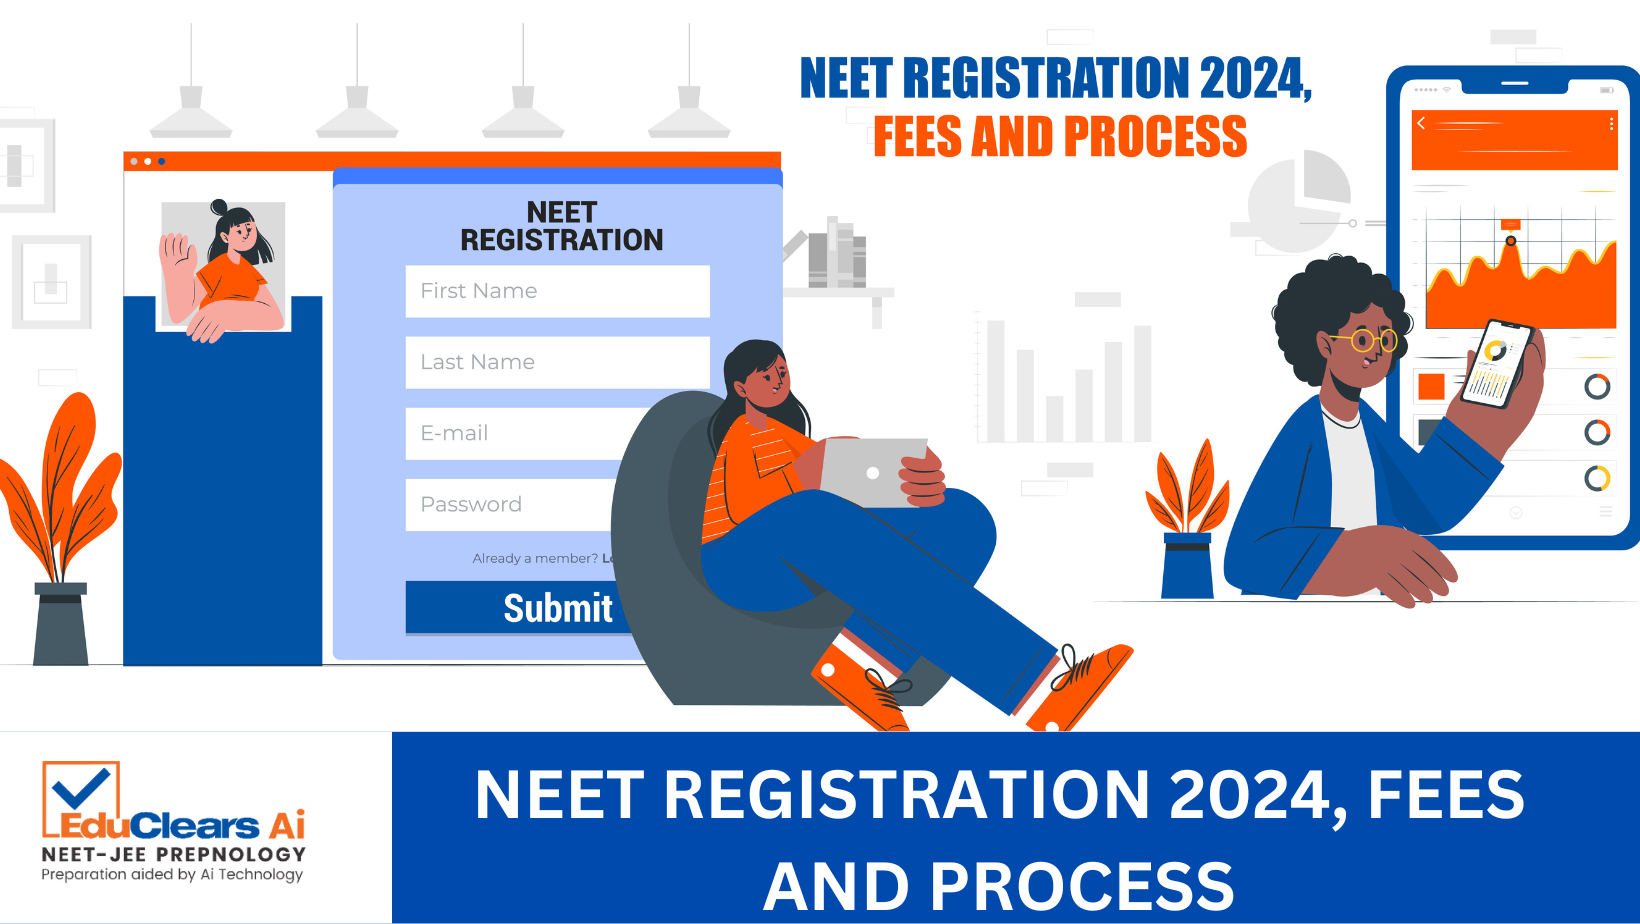 NEET REGISTRATION 2024, FEES, and PROCESS